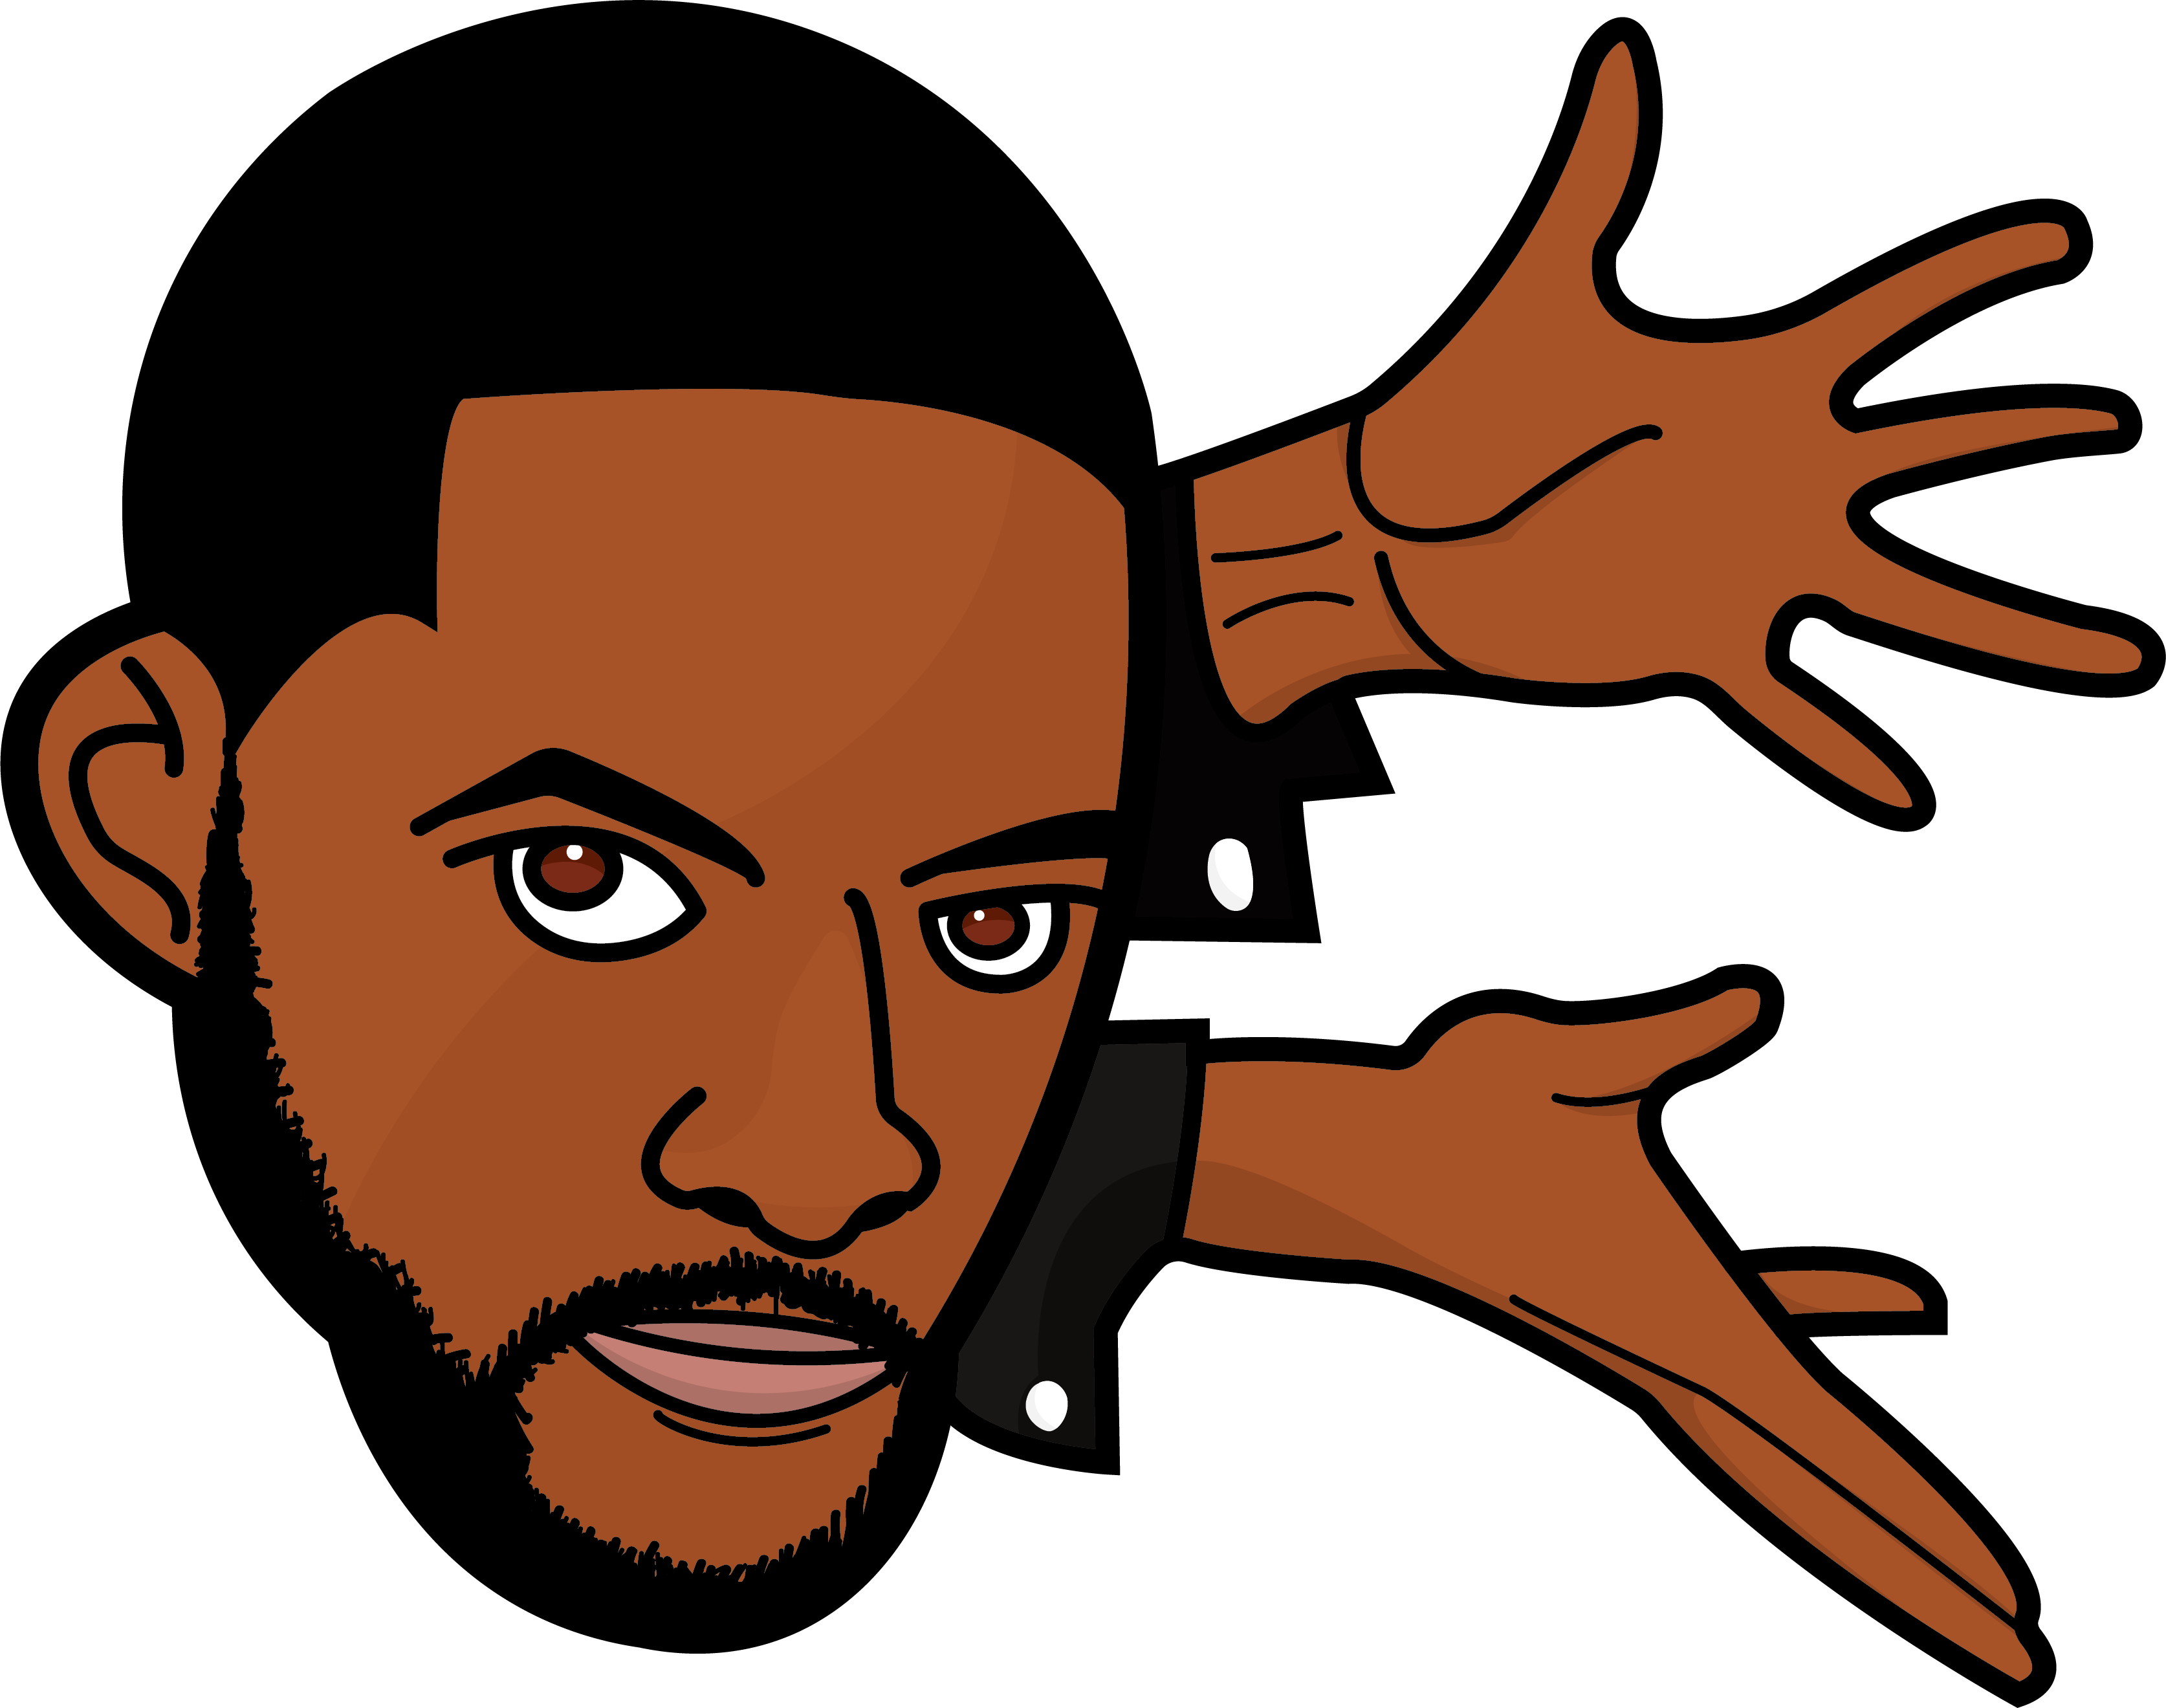 Will Smith Vector Artwork - Will Smith Vector Png.